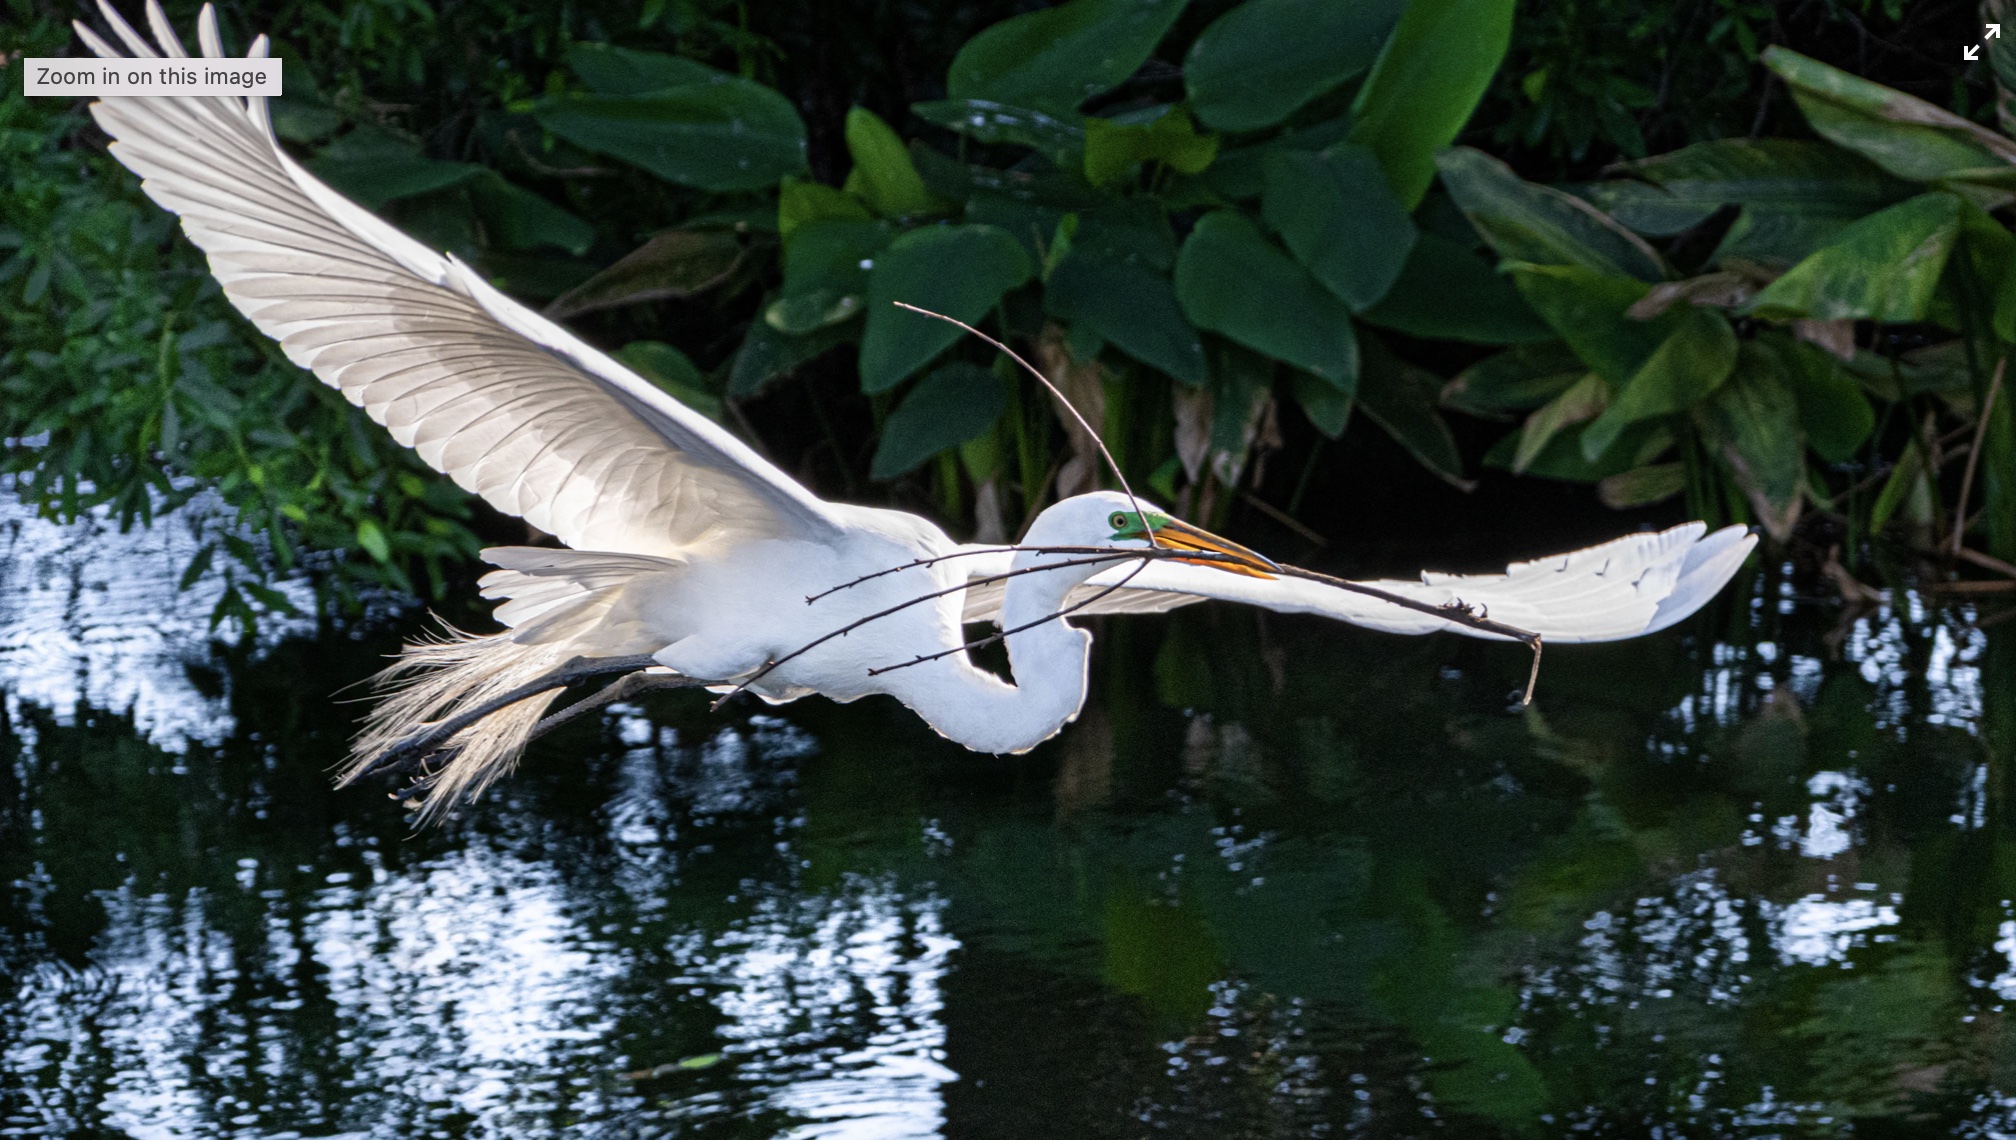 A bird flying over water with its wings spread.